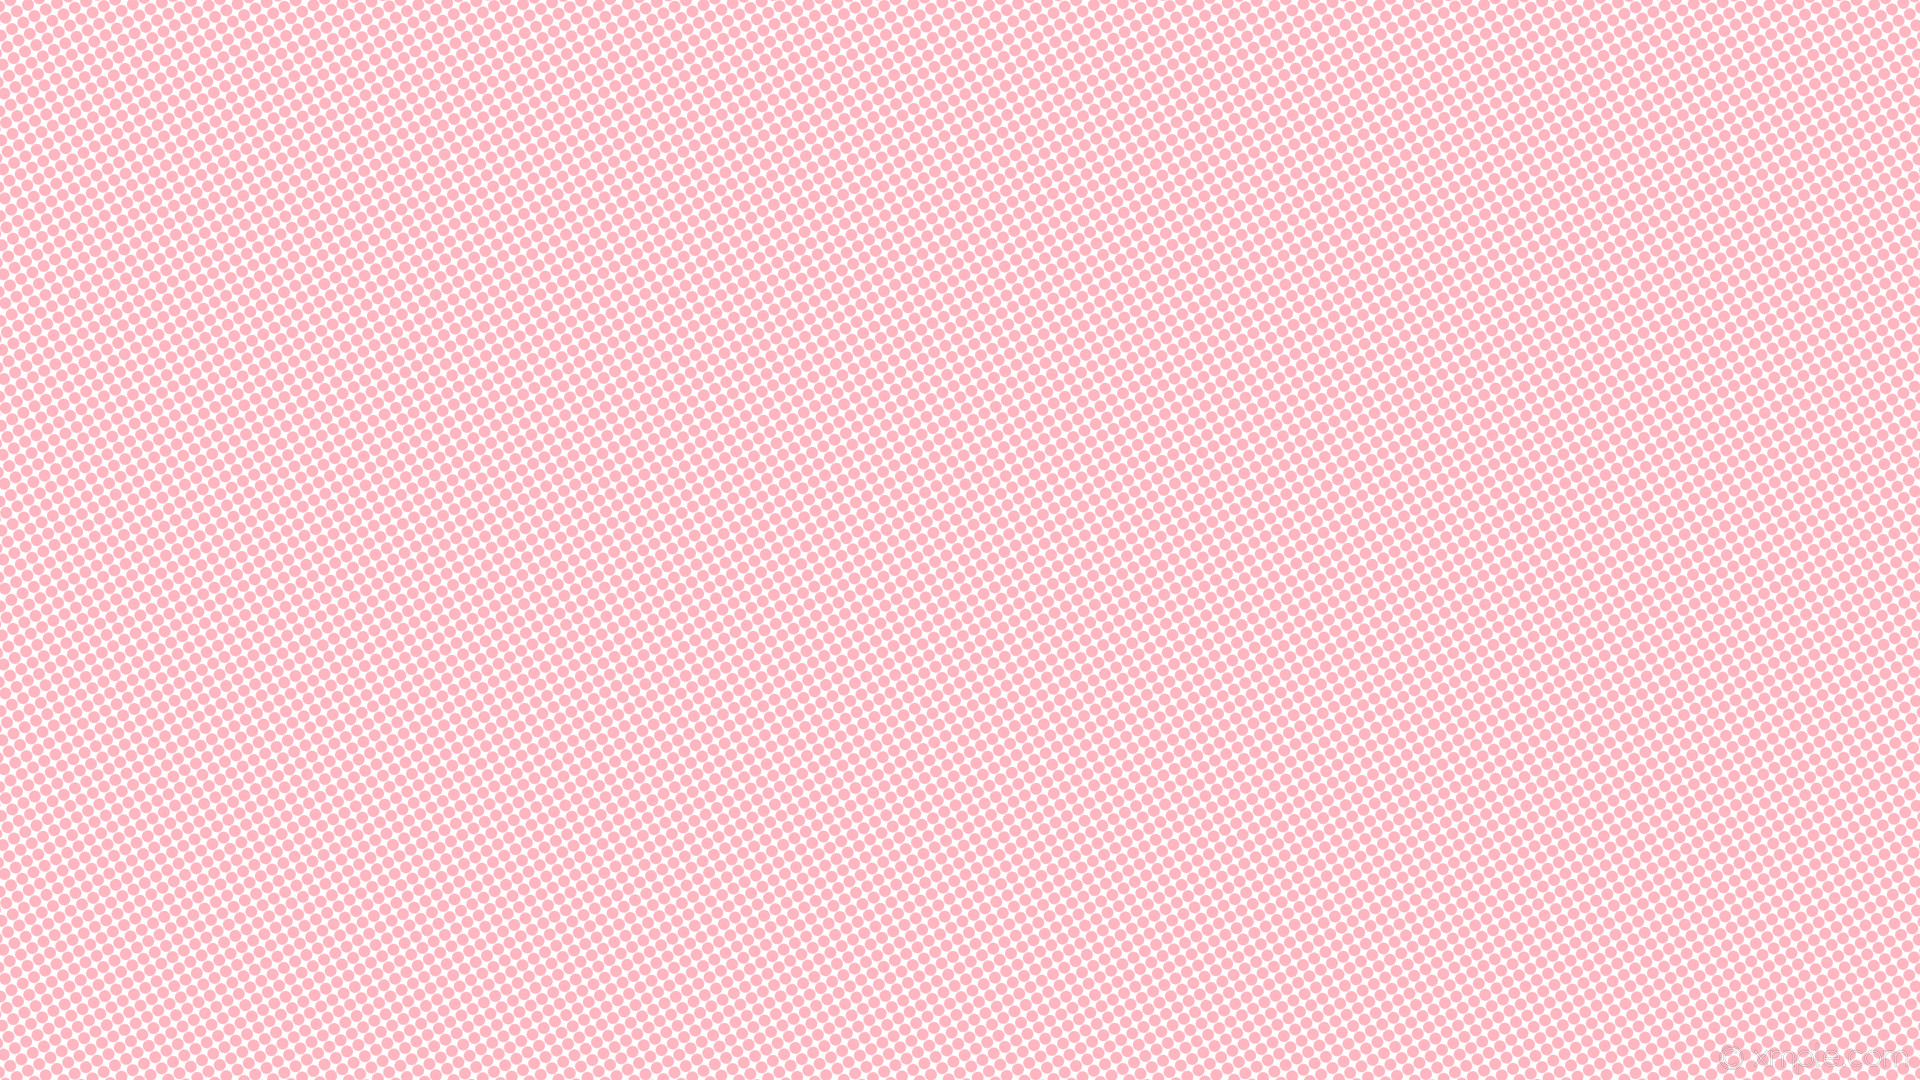 Pastel Pink Aesthetic Wallpapers - Wallpaper Cave